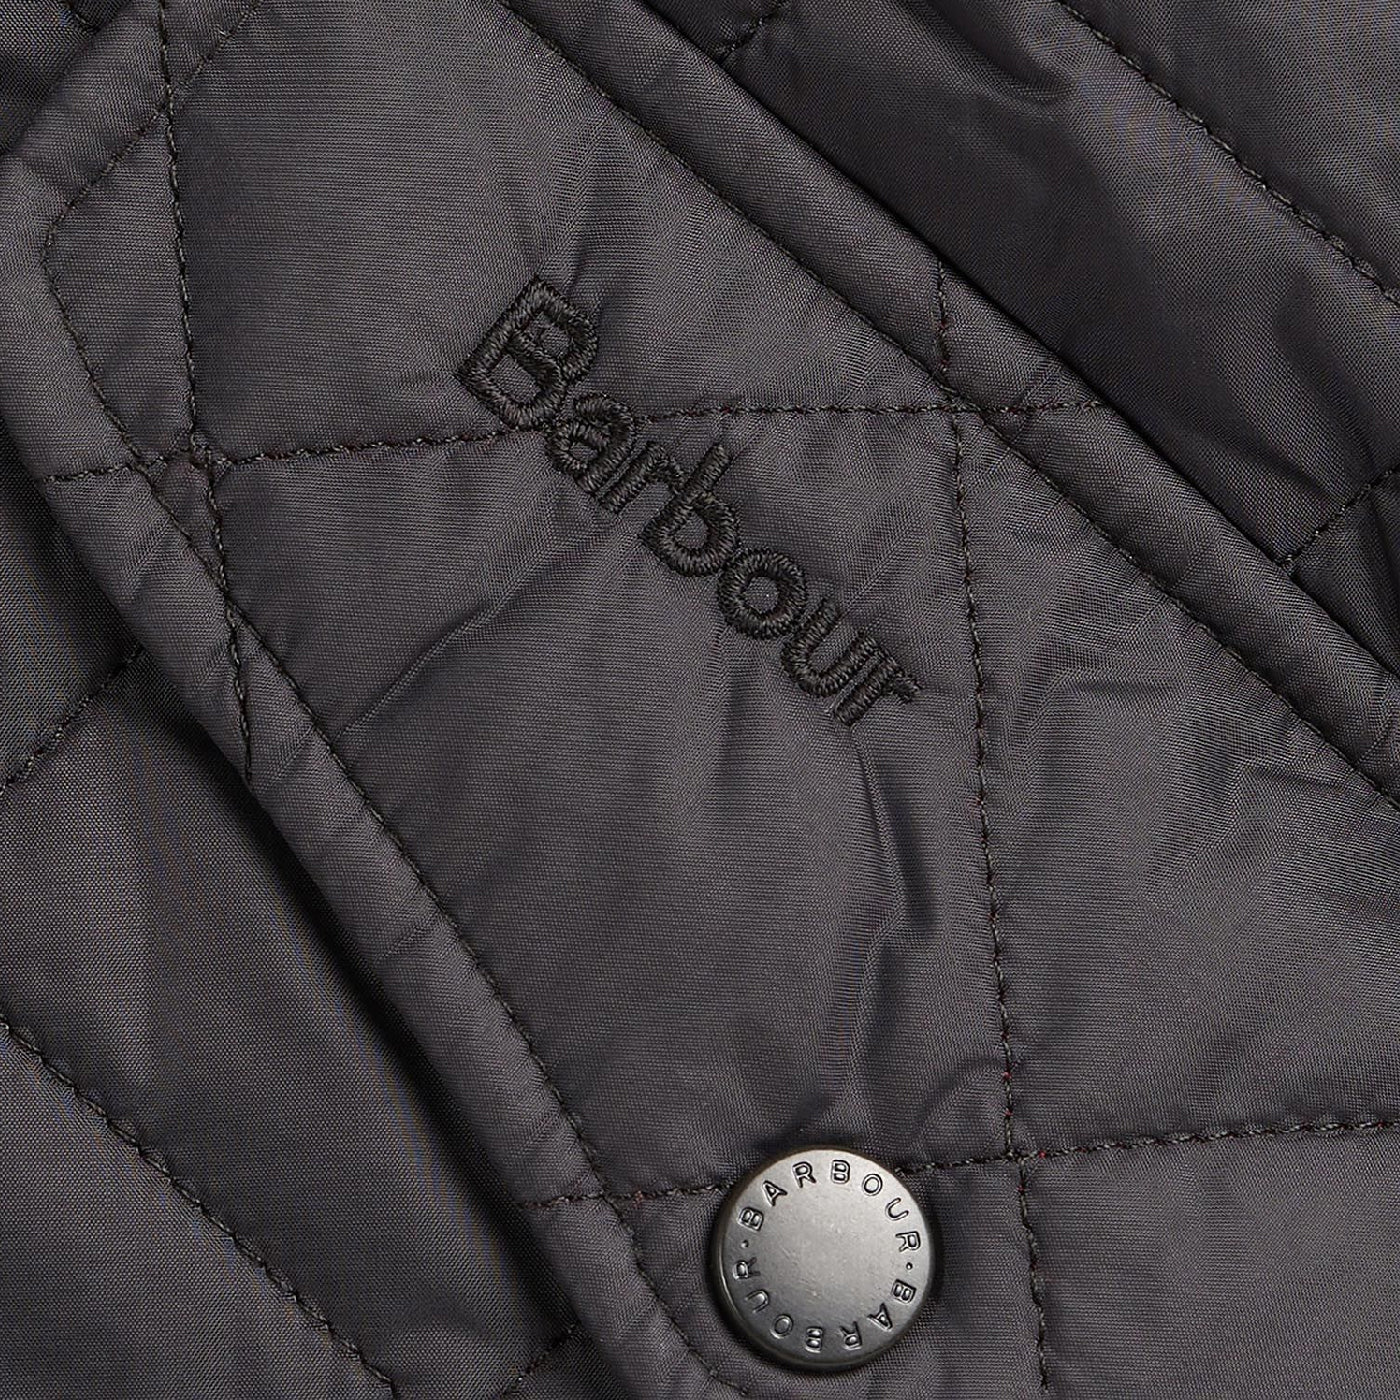 Barbour F/wgt Chelsea